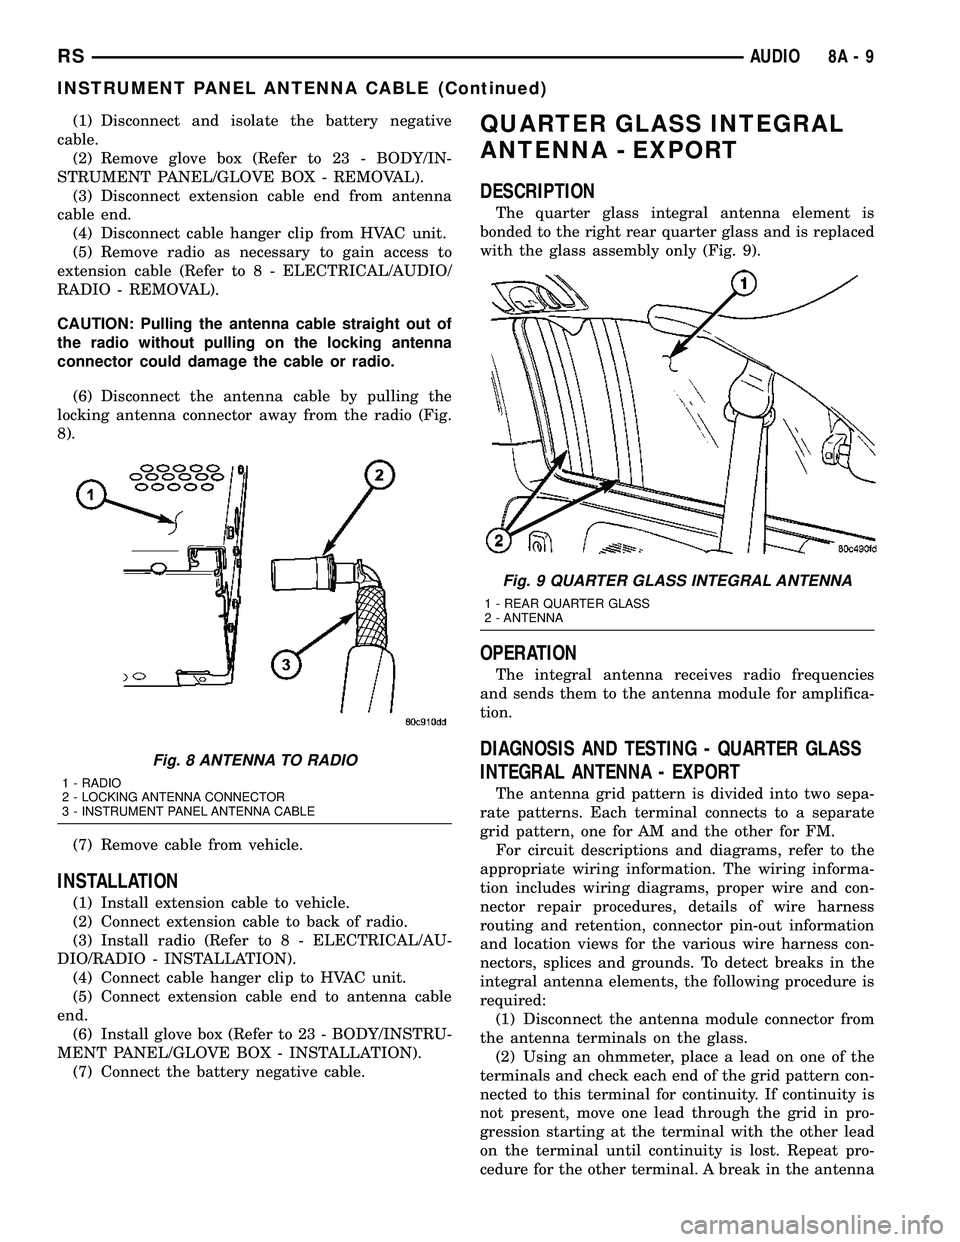 DODGE TOWN AND COUNTRY 2004  Service Manual (1) Disconnect and isolate the battery negative
cable.
(2) Remove glove box (Refer to 23 - BODY/IN-
STRUMENT PANEL/GLOVE BOX - REMOVAL).
(3) Disconnect extension cable end from antenna
cable end.
(4) 